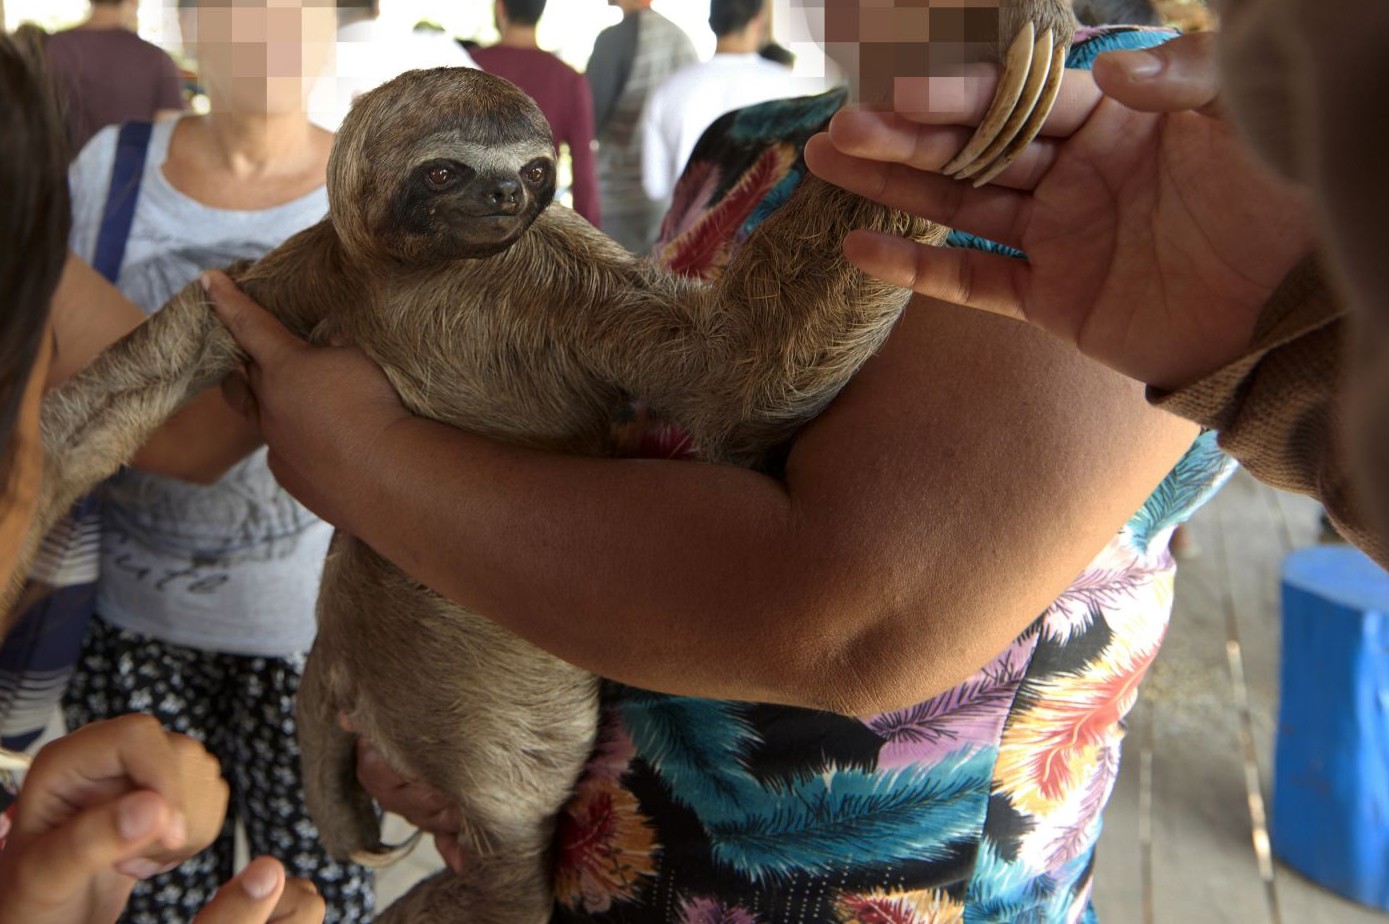 Local sloths are taken from the wild and used for harmful selfies with tourists, in Puerto Alegria, Peru.